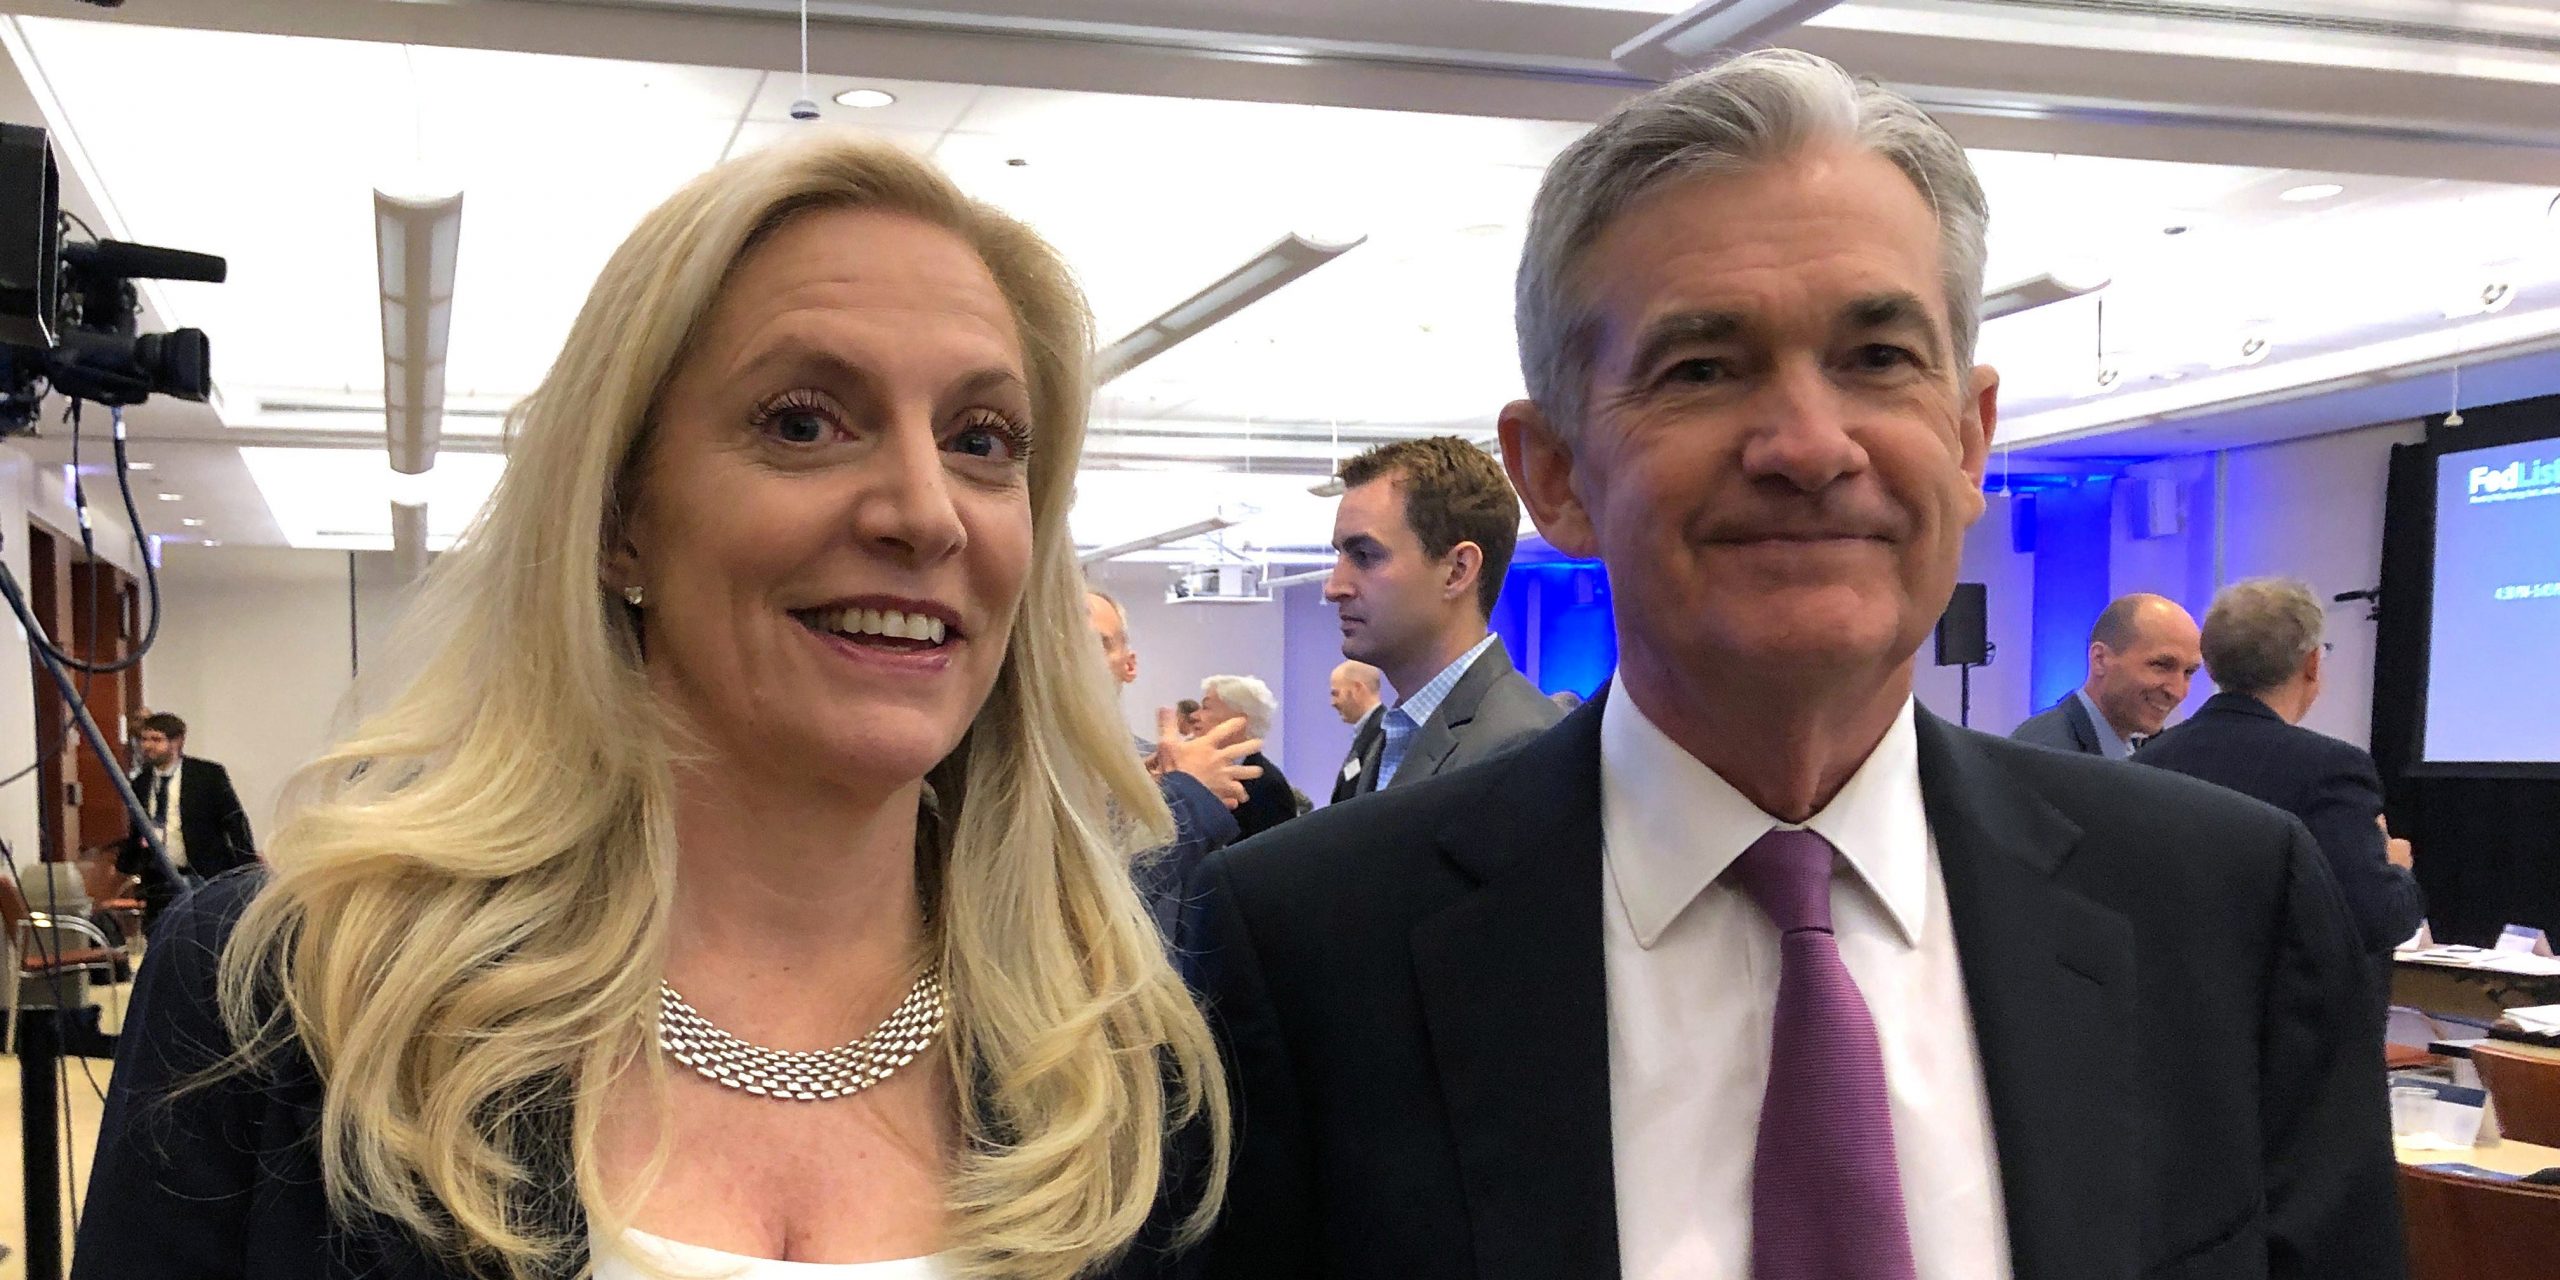 FILE PHOTO: Federal Reserve Chairman Jerome Powell poses for photos with Fed Governor Lael Brainard (L) at the Federal Reserve Bank of Chicago, in Chicago, Illinois, U.S., June 4, 2019.    REUTERS/Ann Saphir